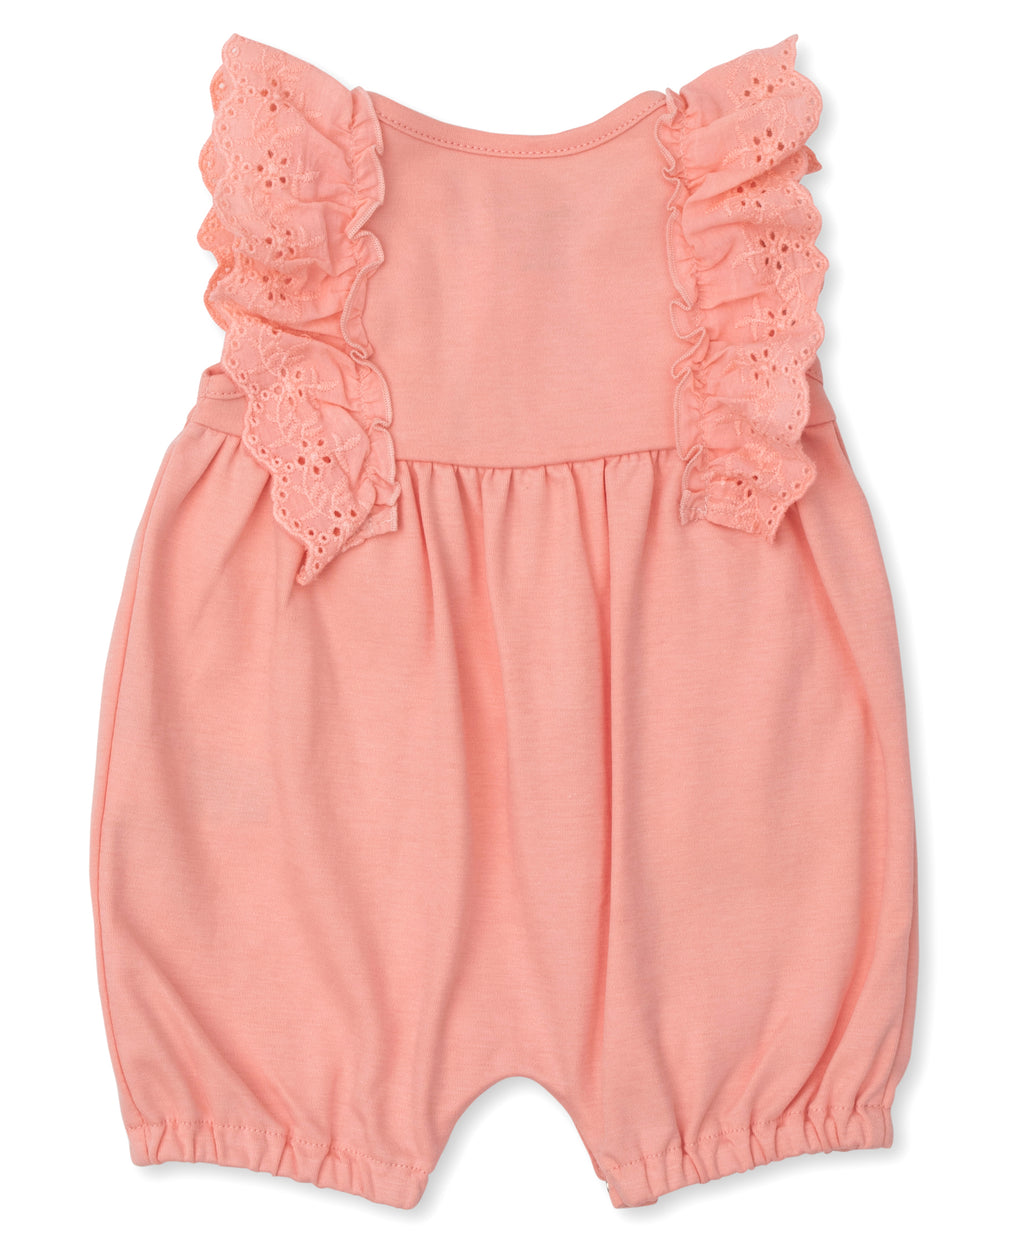 Solid Pink Seahorse Party Short Playsuit